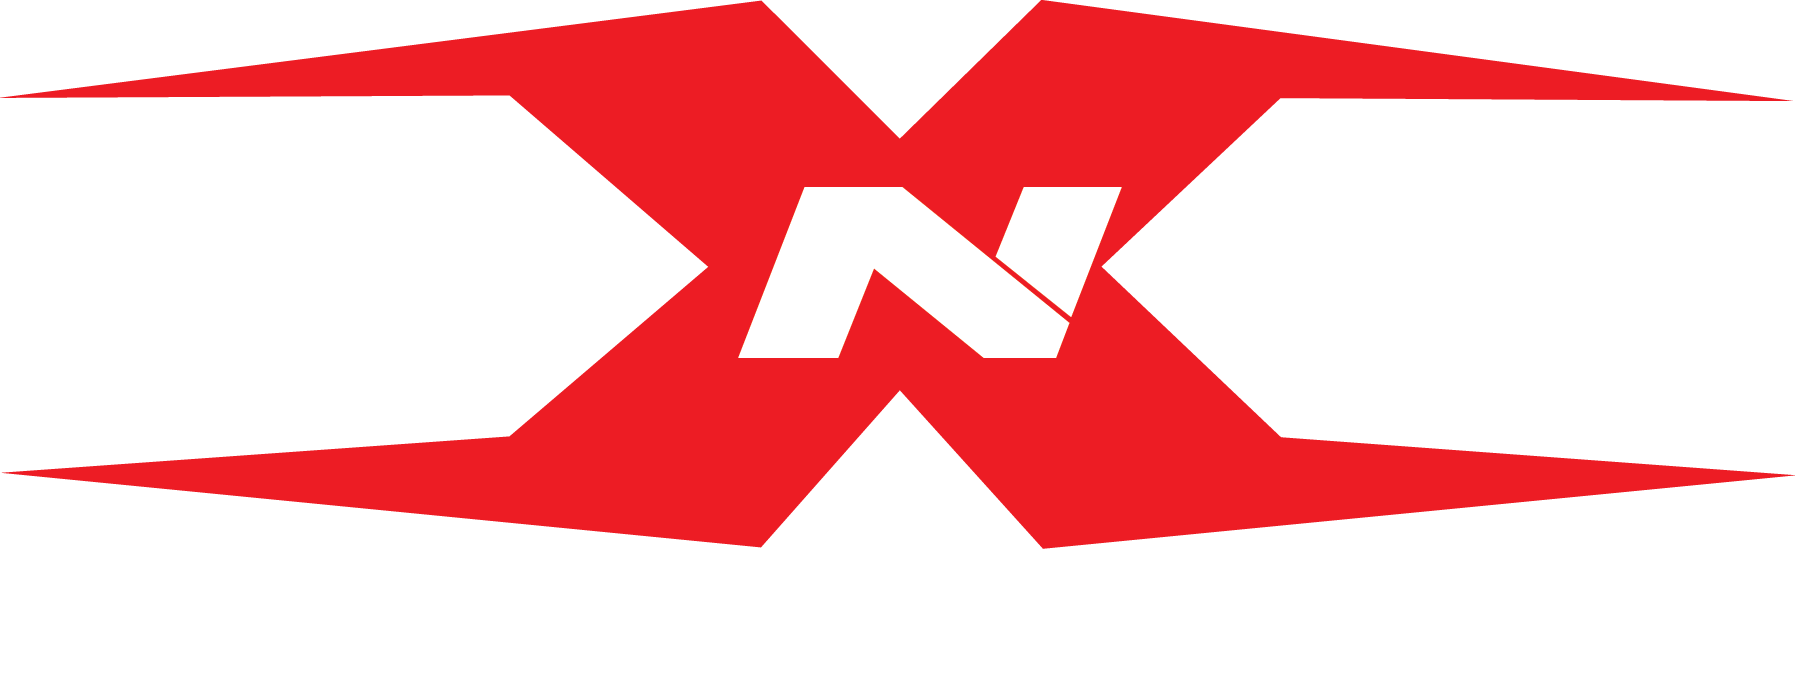 OneX USA logo. Full custom race leather suits and gloves, ready to race suits and gloves, apparel, parts and accessories. Motorcycle racing.